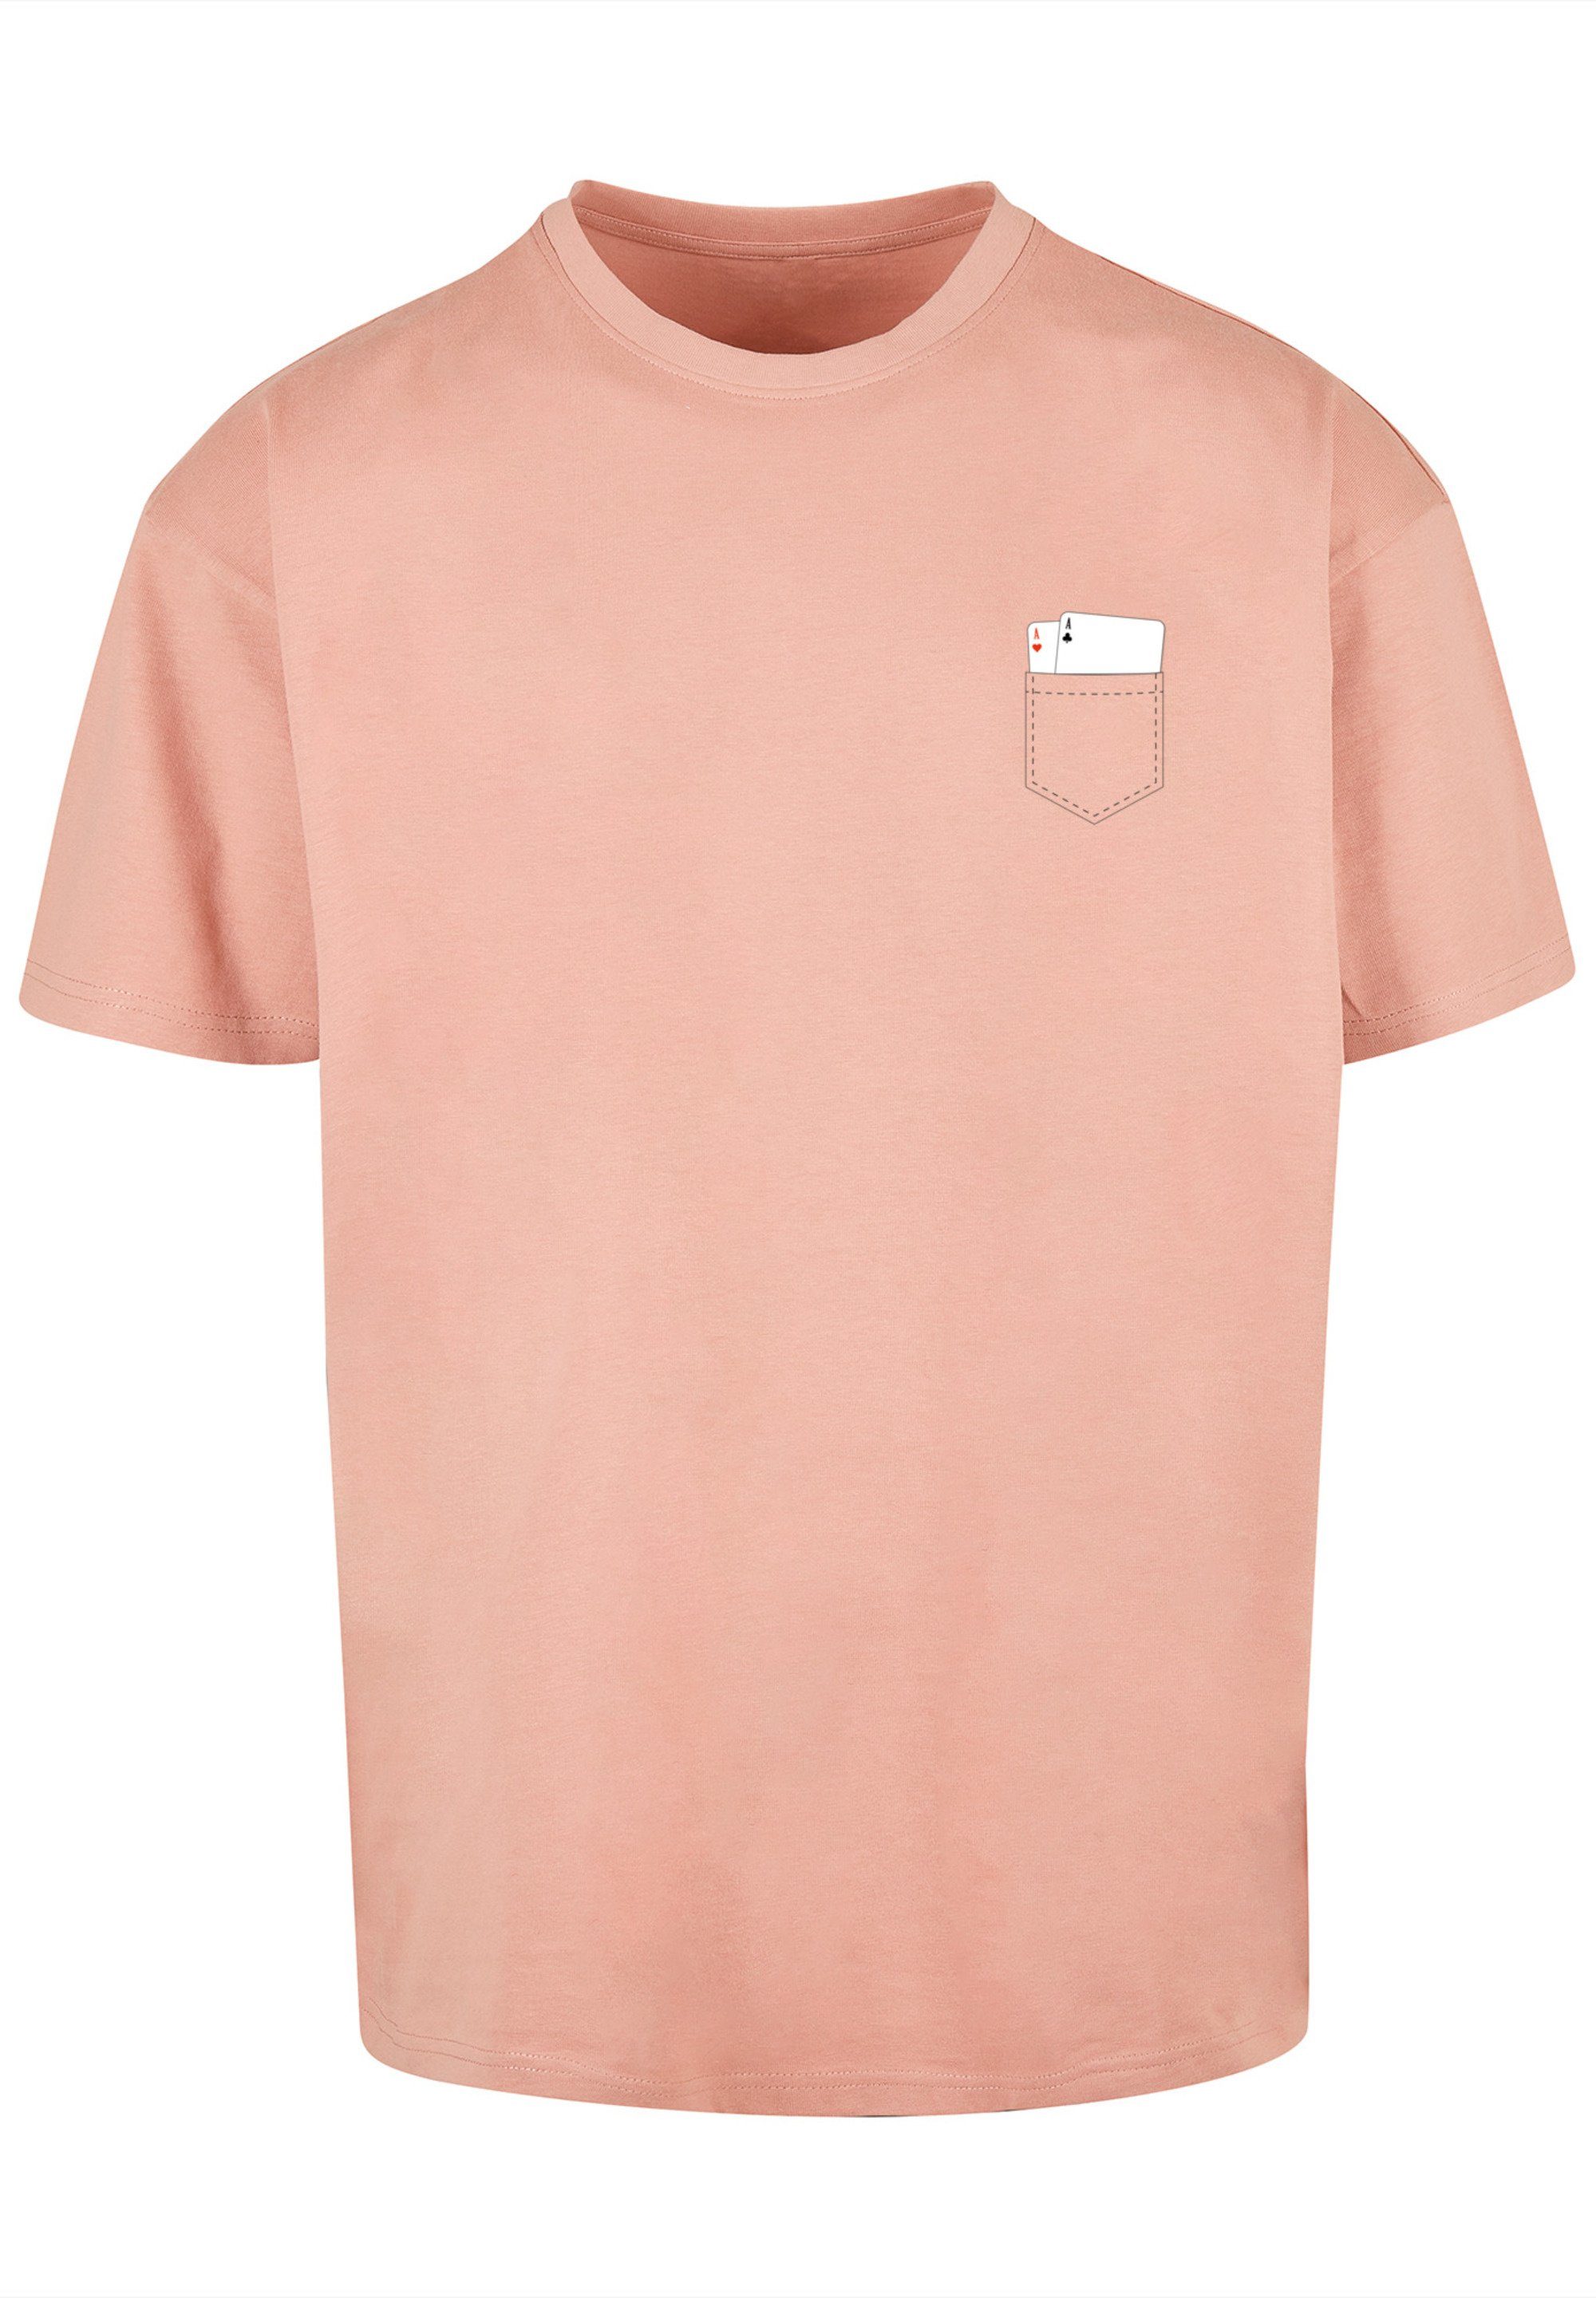 Cards Pocket with Print amber F4NT4STIC T-Shirt